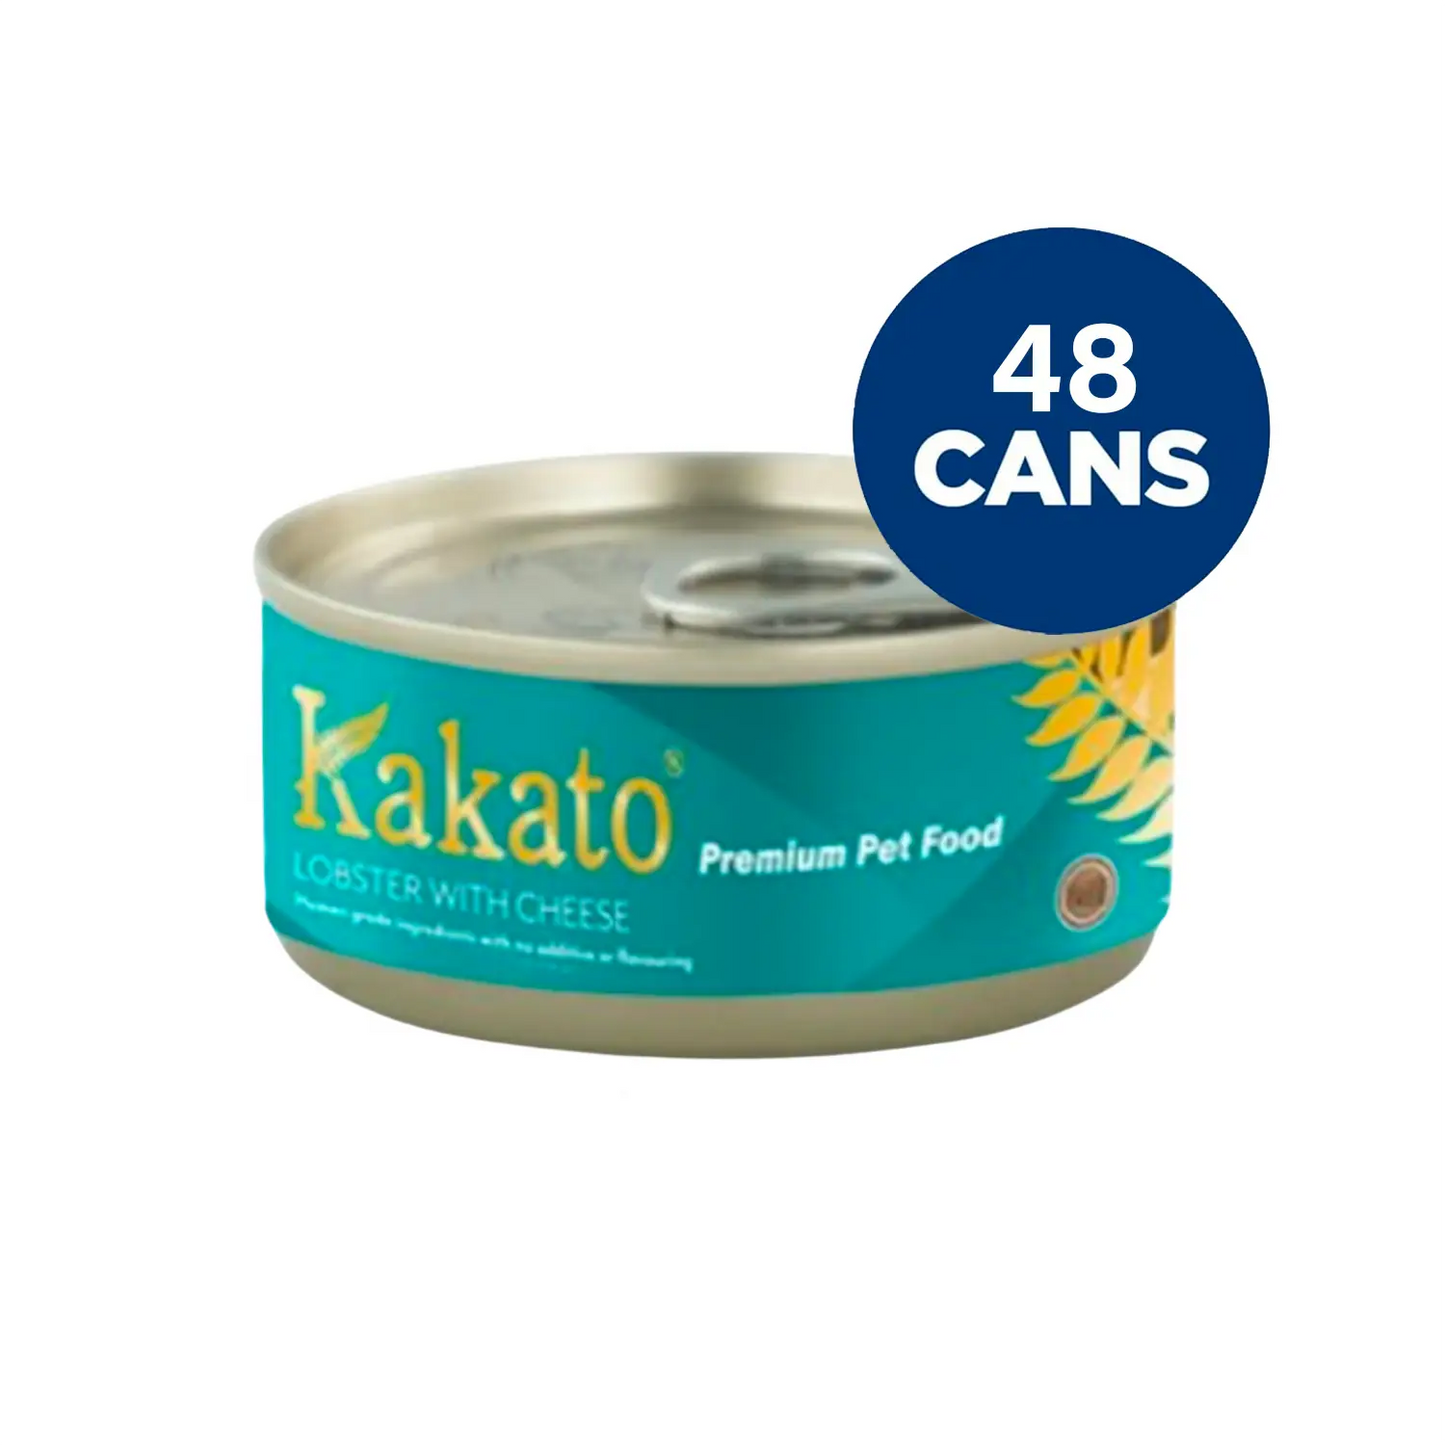 Kakato - Lobster With Cheese (Dogs & Cats) Canned 70g